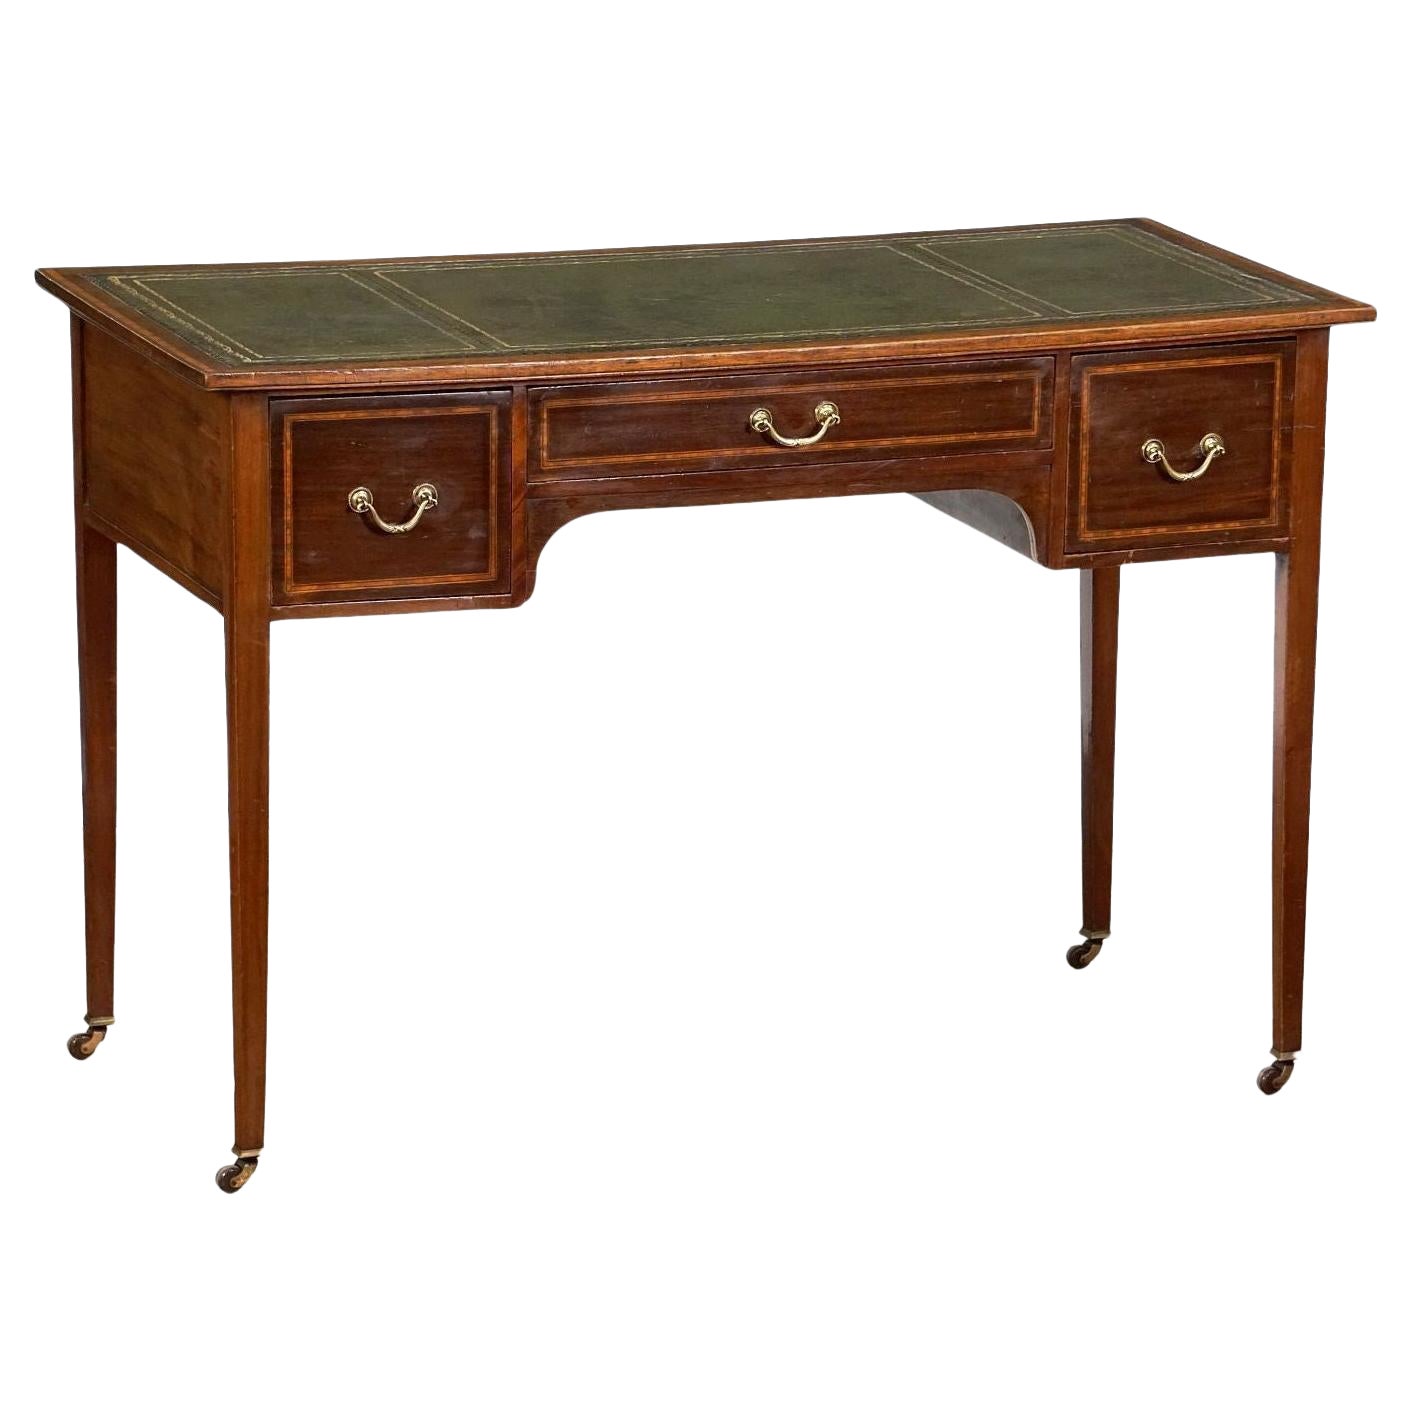 English Writing Table or Desk of Inlaid Mahogany with Embossed Leather Top